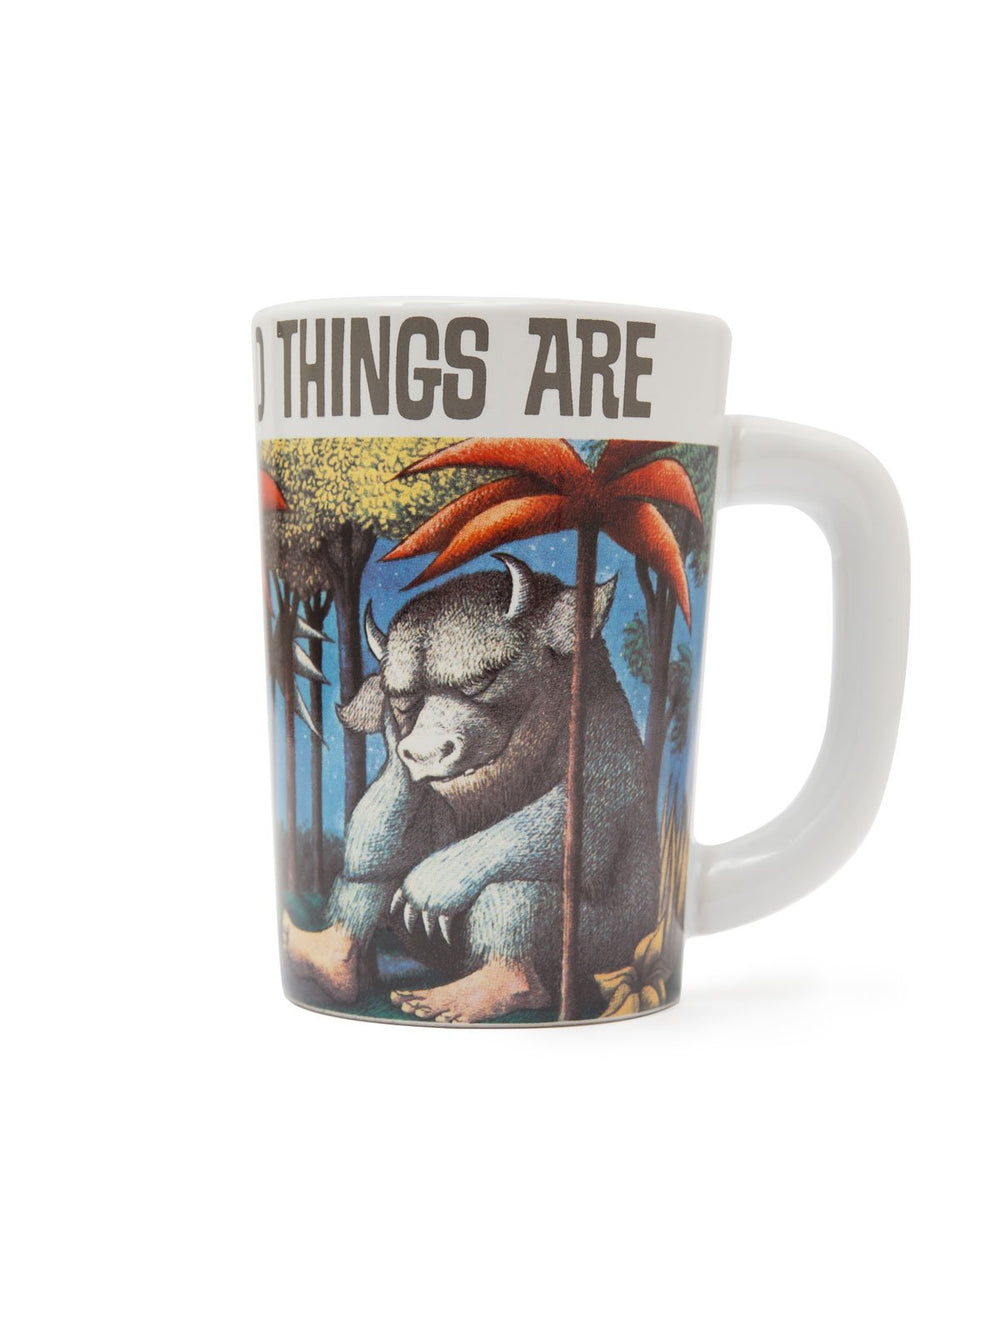 Where The Wild Things Are Mug - West of Camden